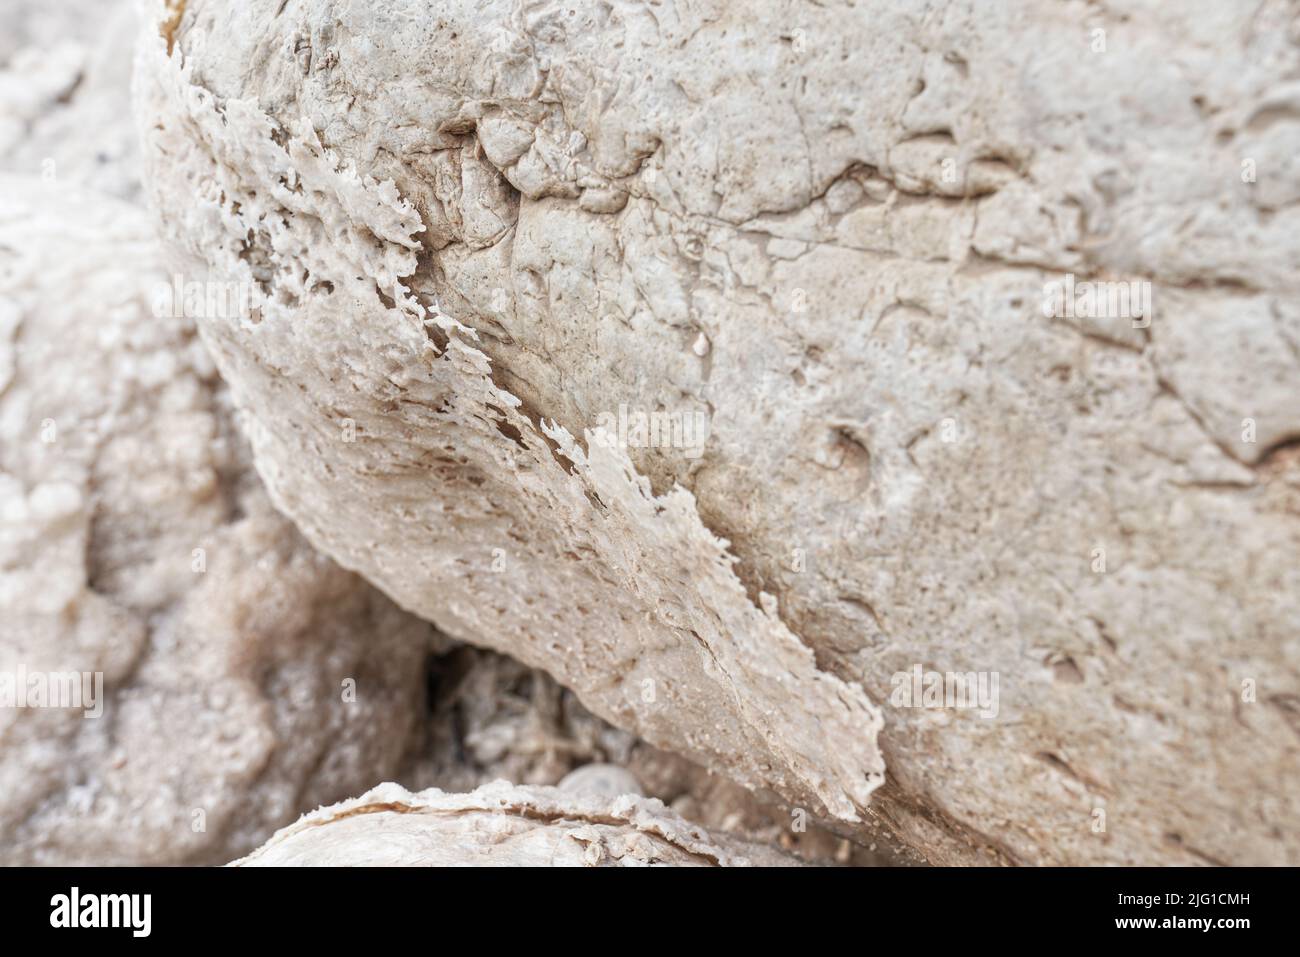 Sand and stones covered with crystalline salt crust on shore of Dead Sea, closeup detail Stock Photo